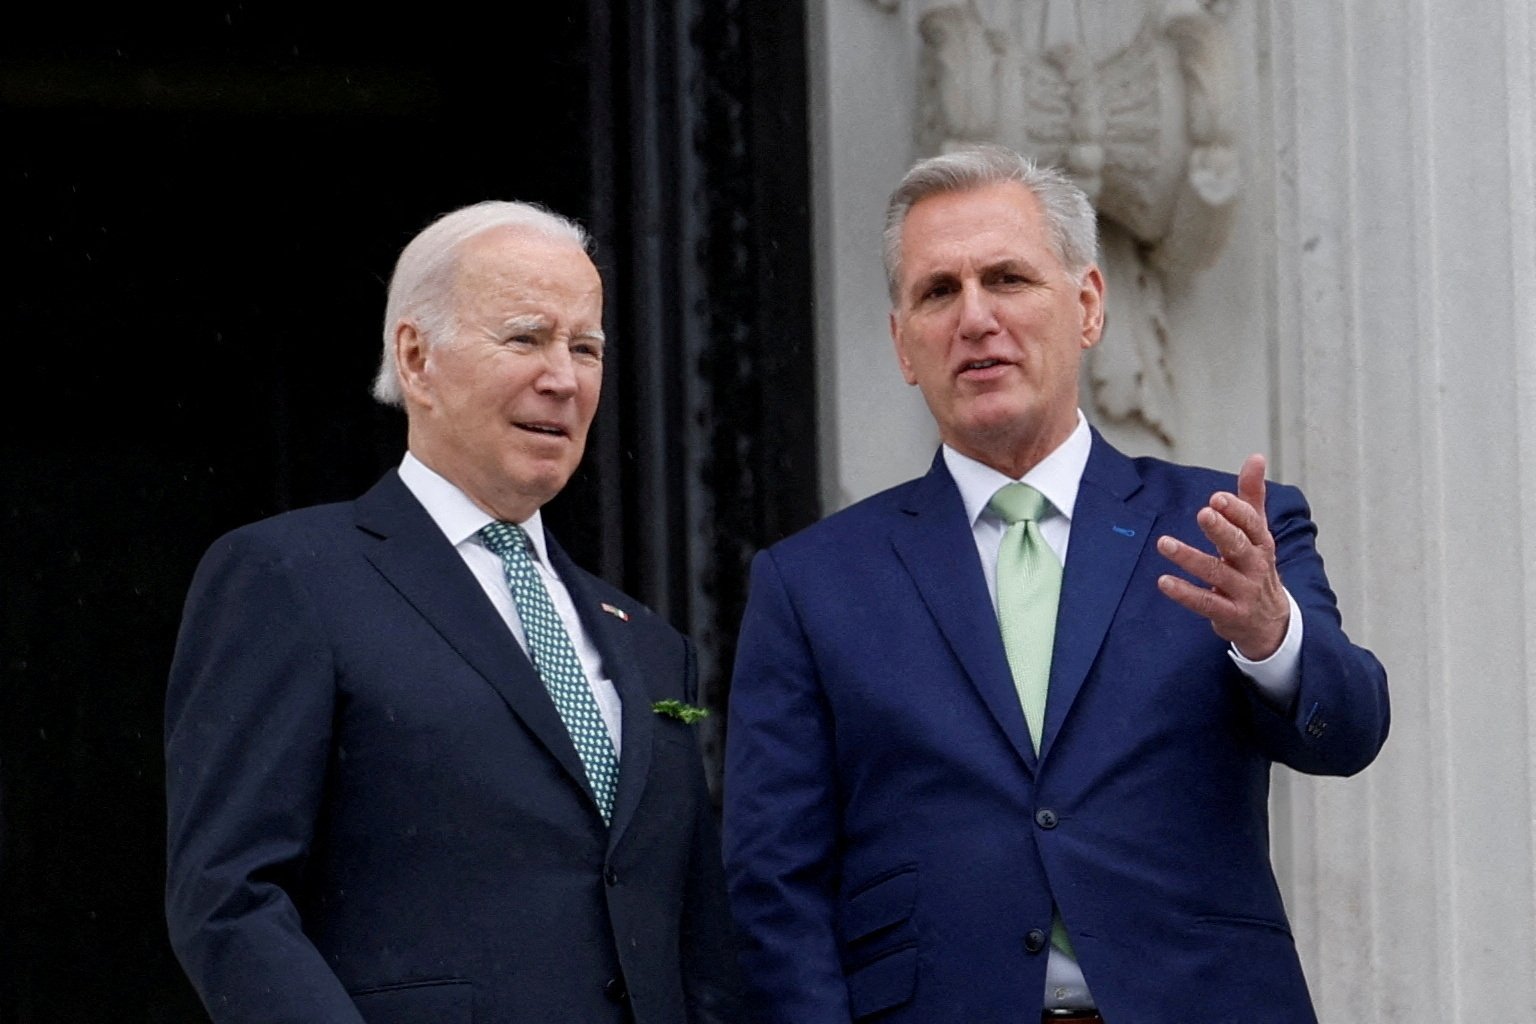 U.S. President Joe Biden talks with House Speaker Kevin McCarthy as they depart following the annual Friends of Ireland luncheon at the U.S. Capitol in Washington, U.S., March 17, 2023. (Reuters Photo)